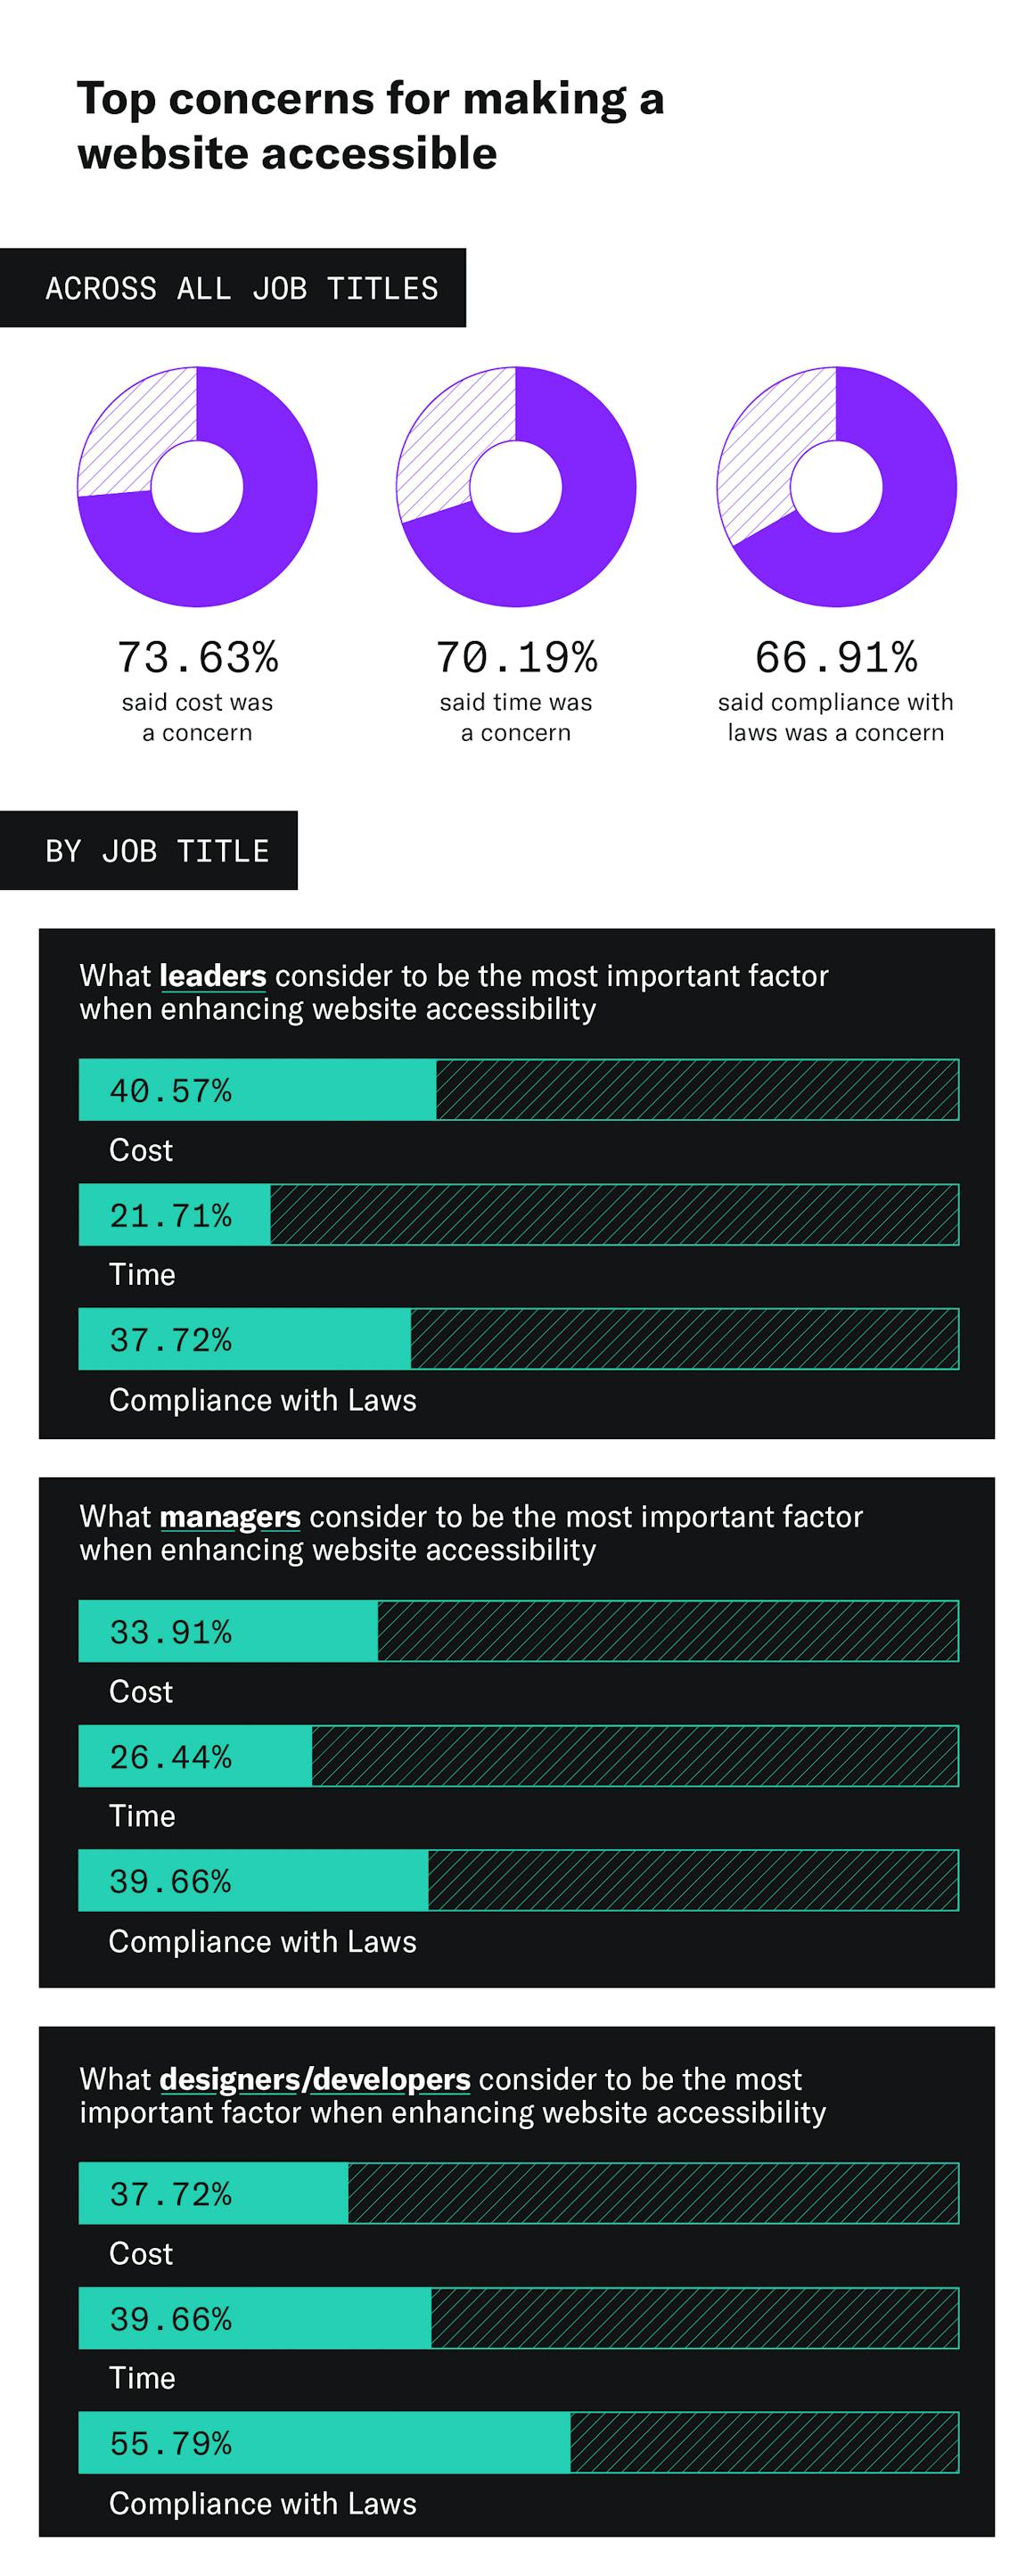 An infographic depicting the top concerns for making a website accessible between time, cost, and compliance with laws for leaders, managers, and designers/developers. Cost is the biggest concern for 40.57% of leaders. Compliance with laws is the biggest concern for 39.66% of managers and 55.79% of designers/developers.